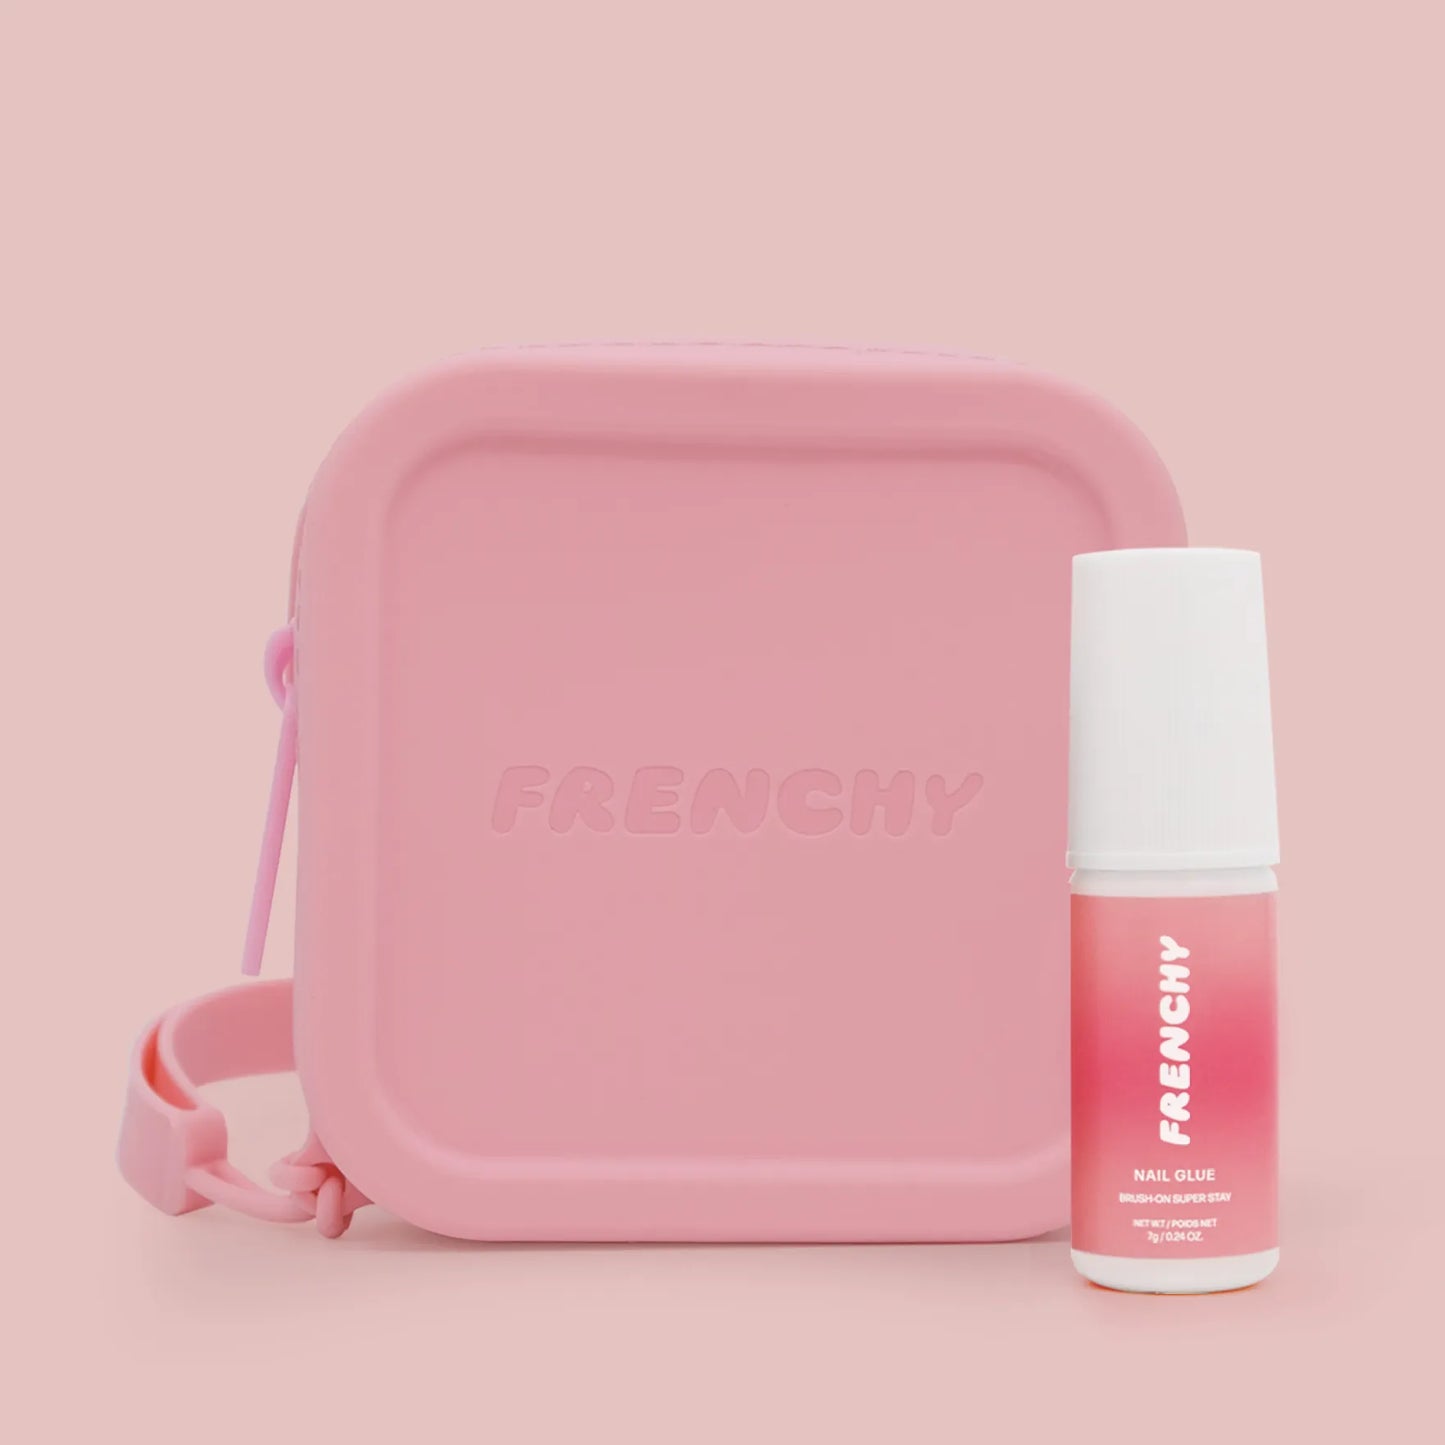 Product photo of 'Frenchy Silicon Travel Case' with 'Brush-On Nail Glue,' showcasing a bundled set that includes the travel case for storage and transportation, along with the brush-on nail glue for easy application and maintenance of your press-on nails.